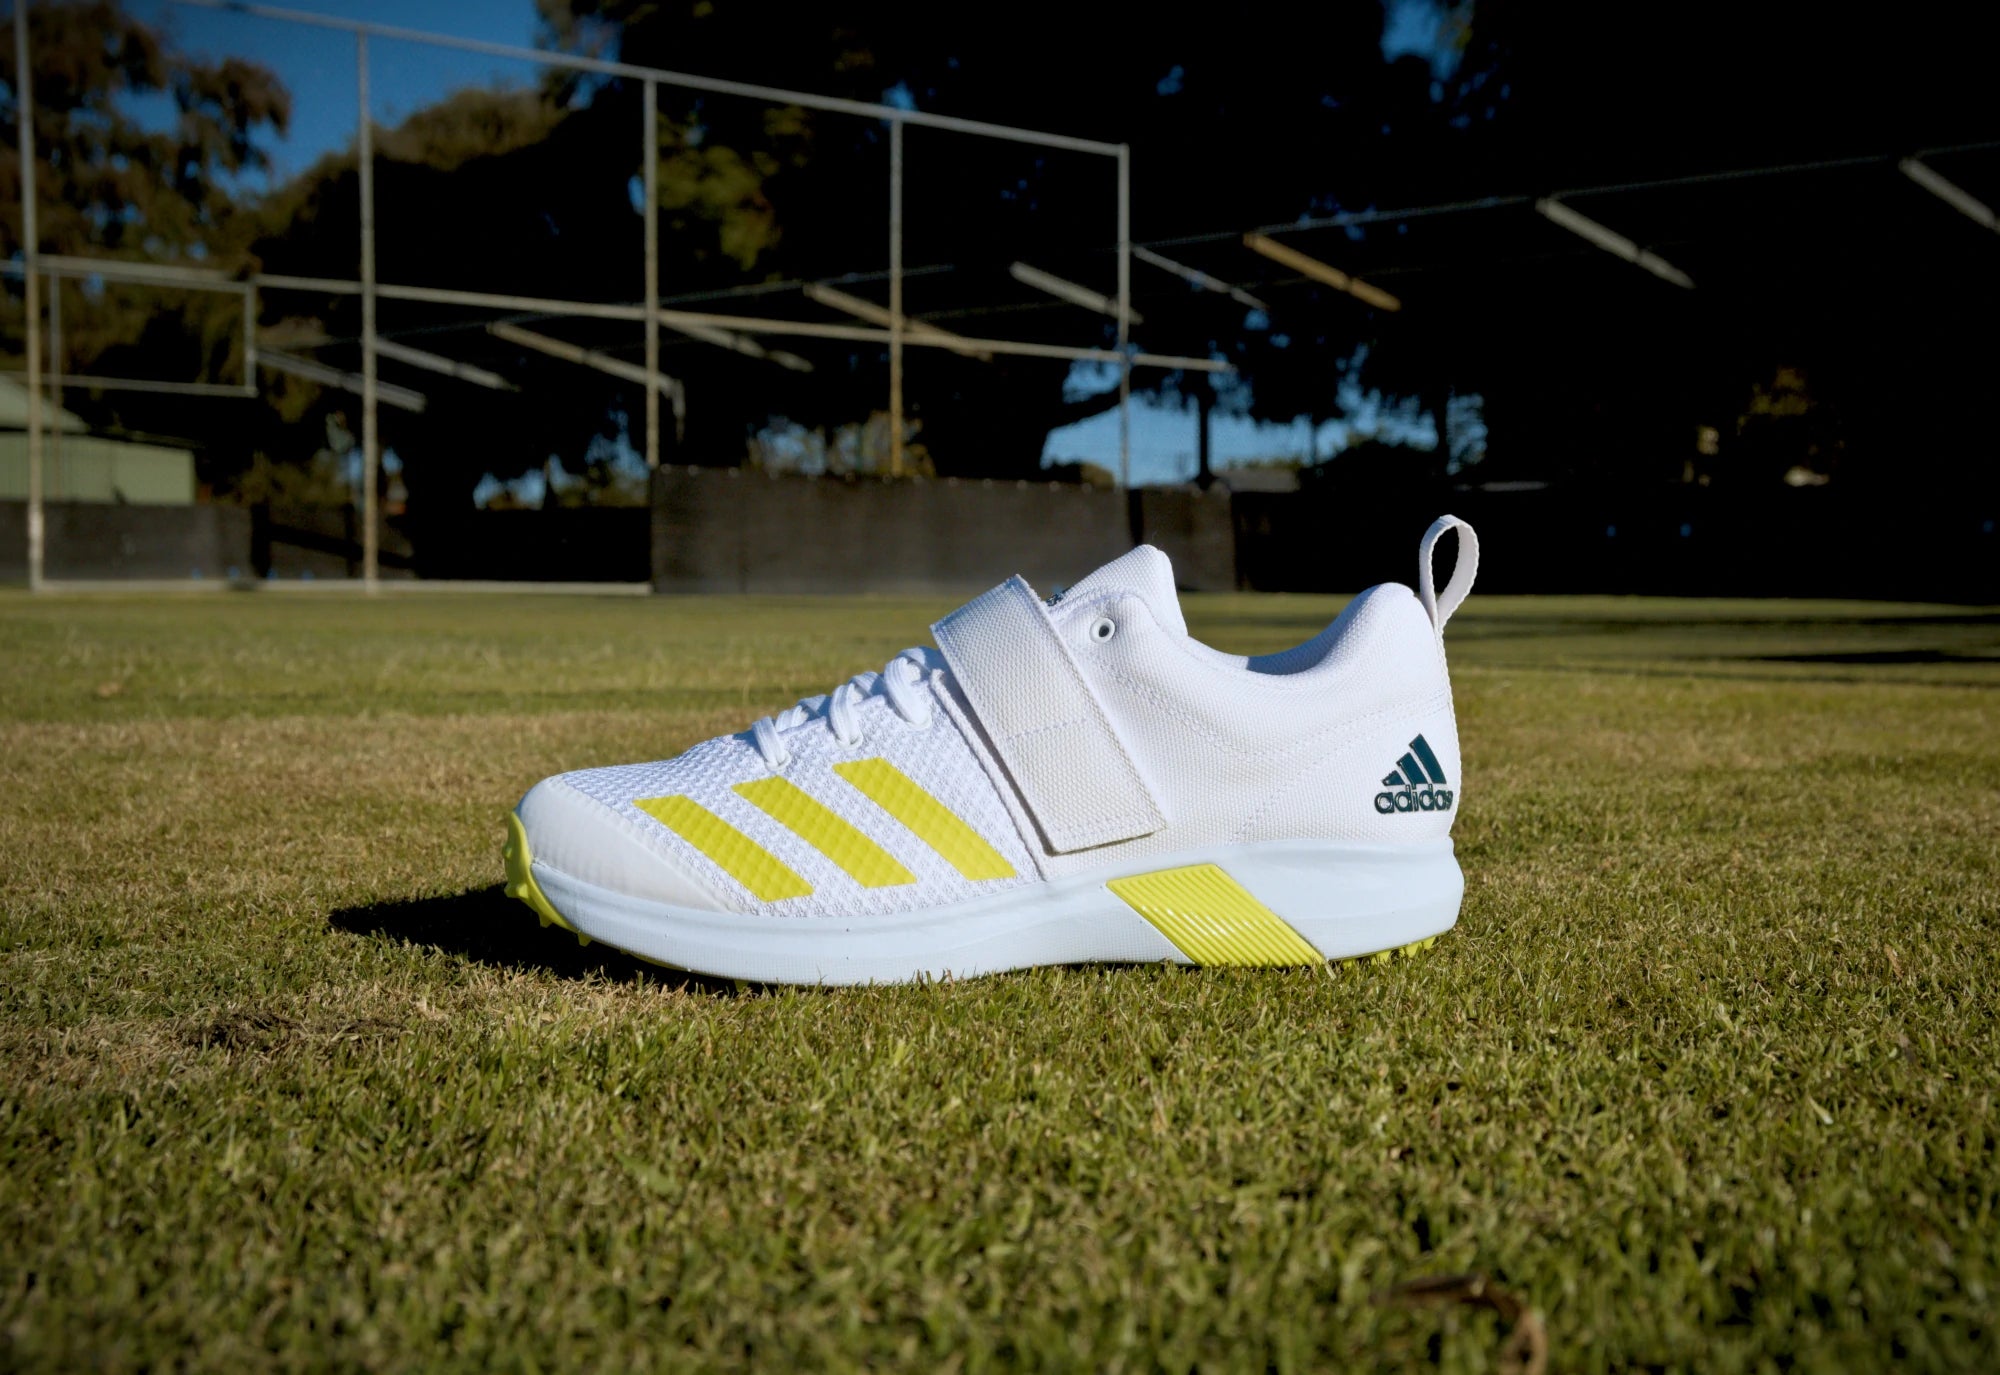 All Rounder Cricket Shoes